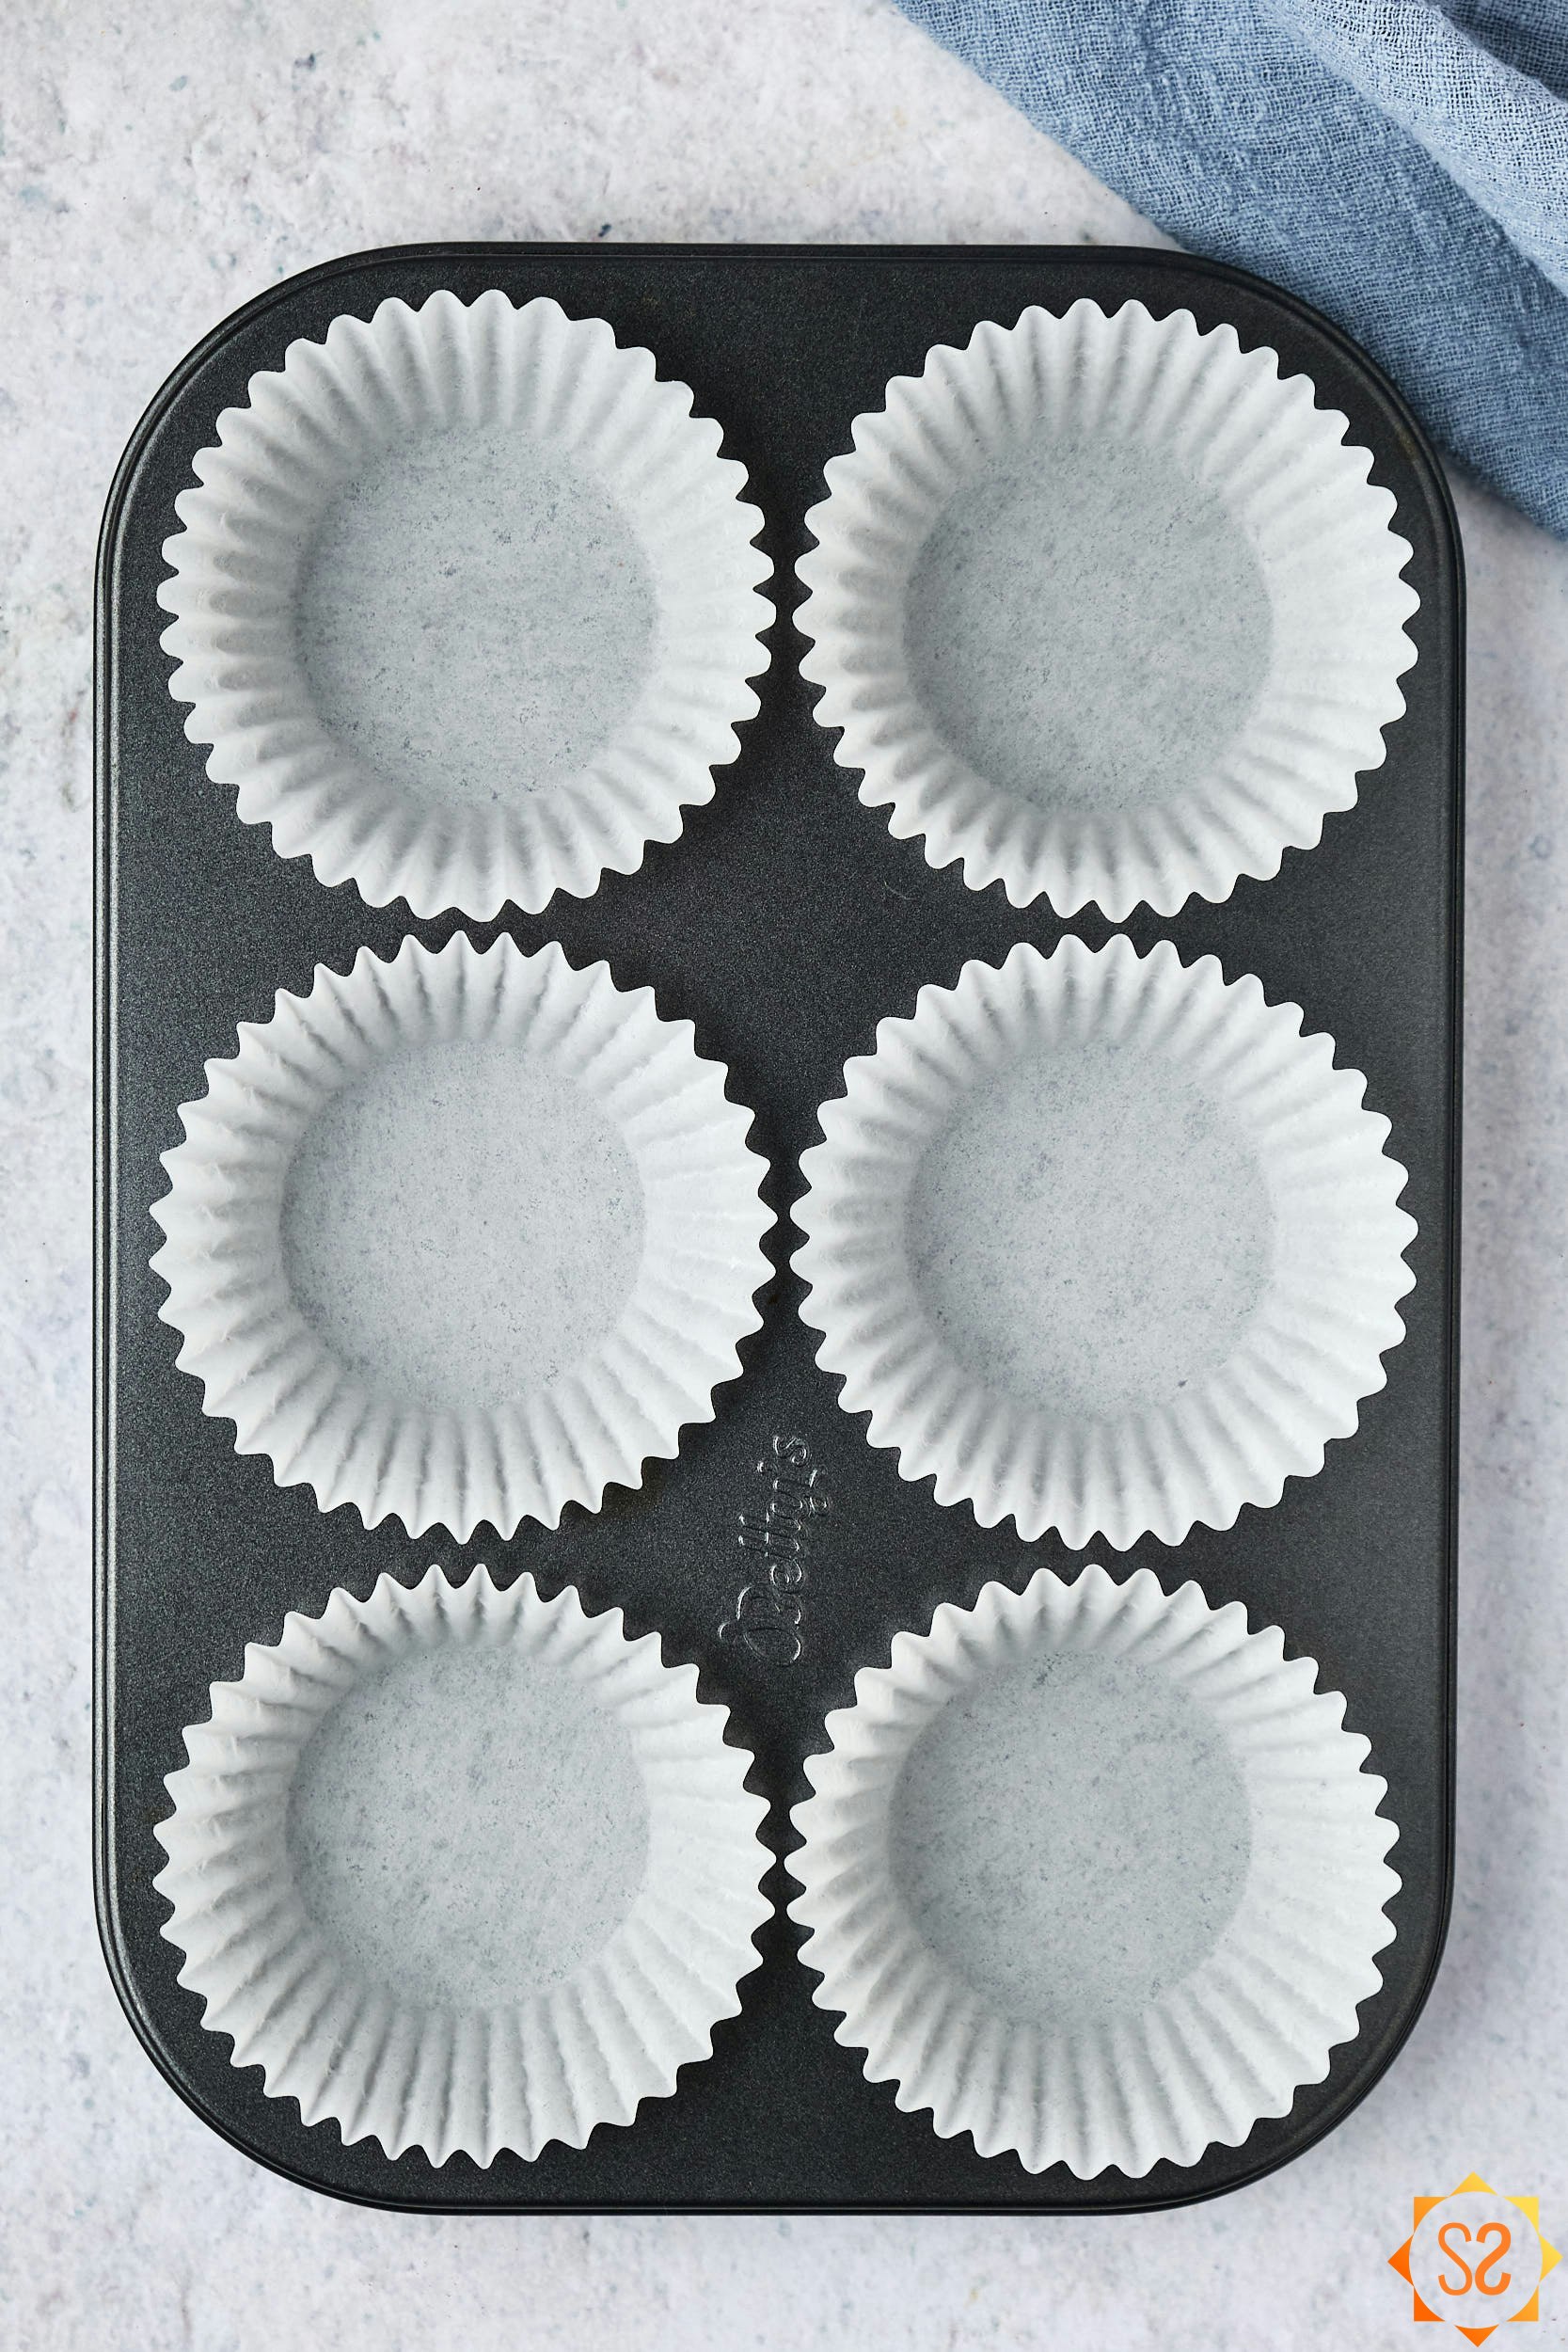 A 6-hole muffin tin filled with liners.